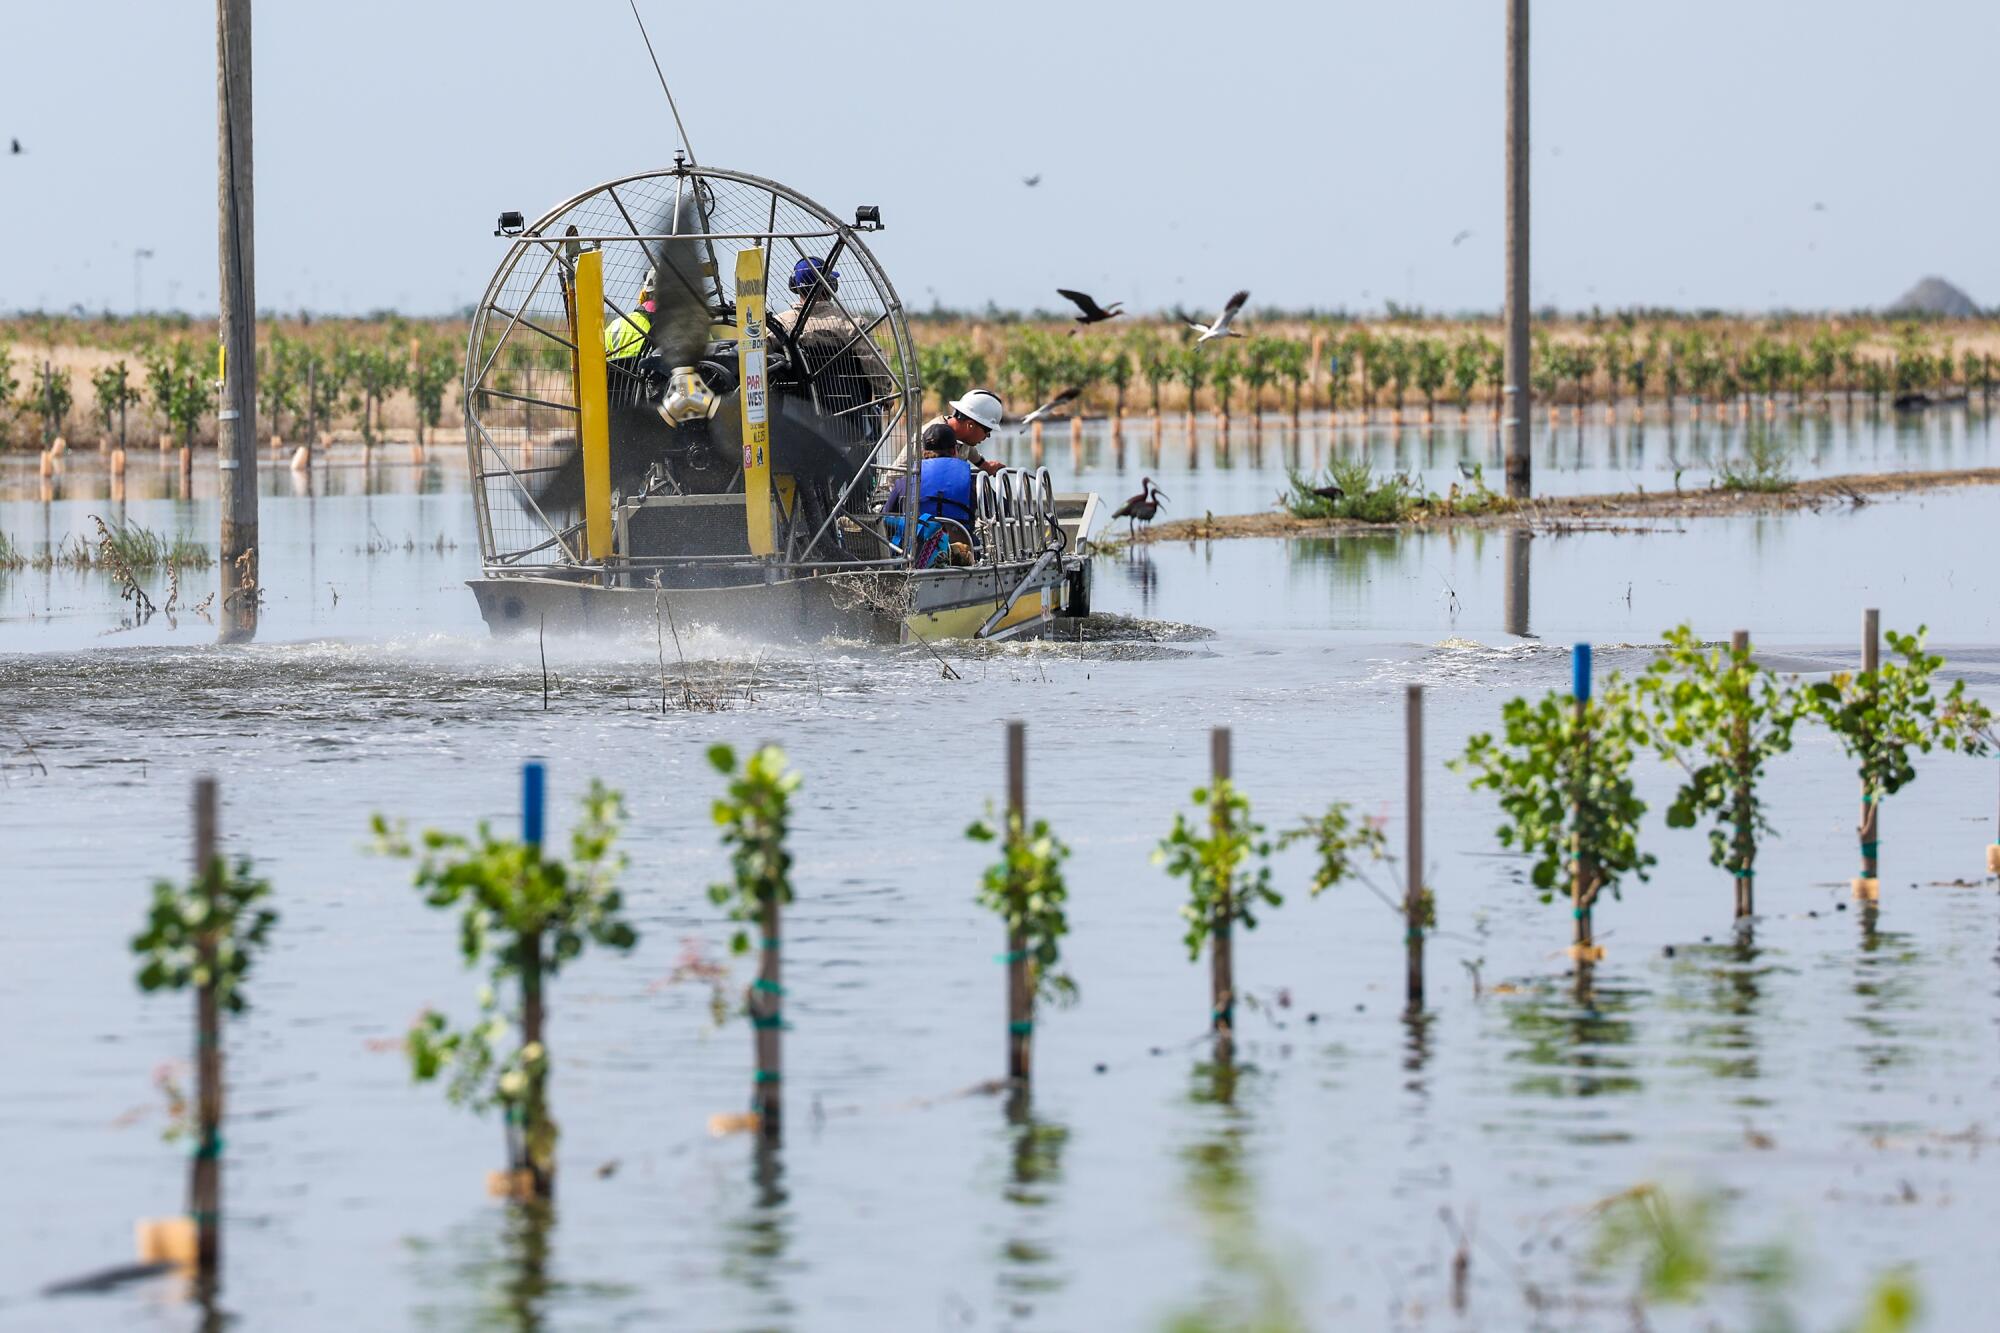 An airboat glides over the water of a flooded pistachio orchard.